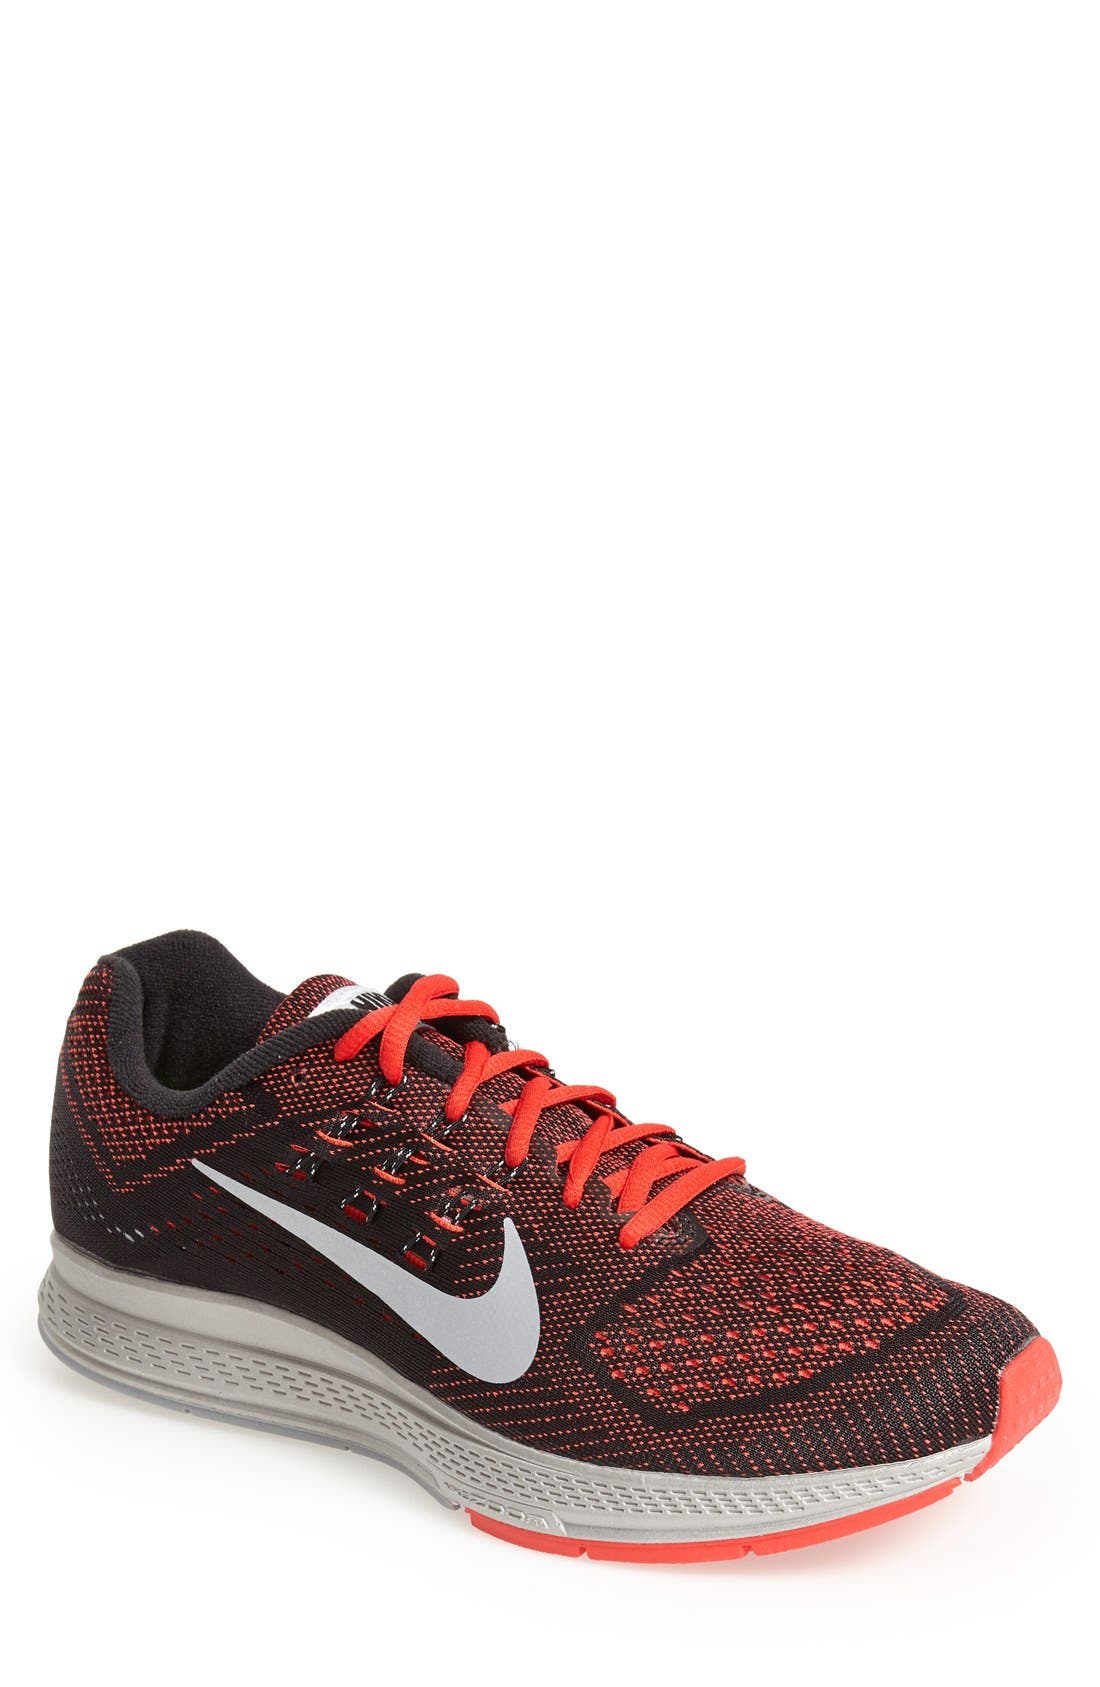 nike structure 18 red